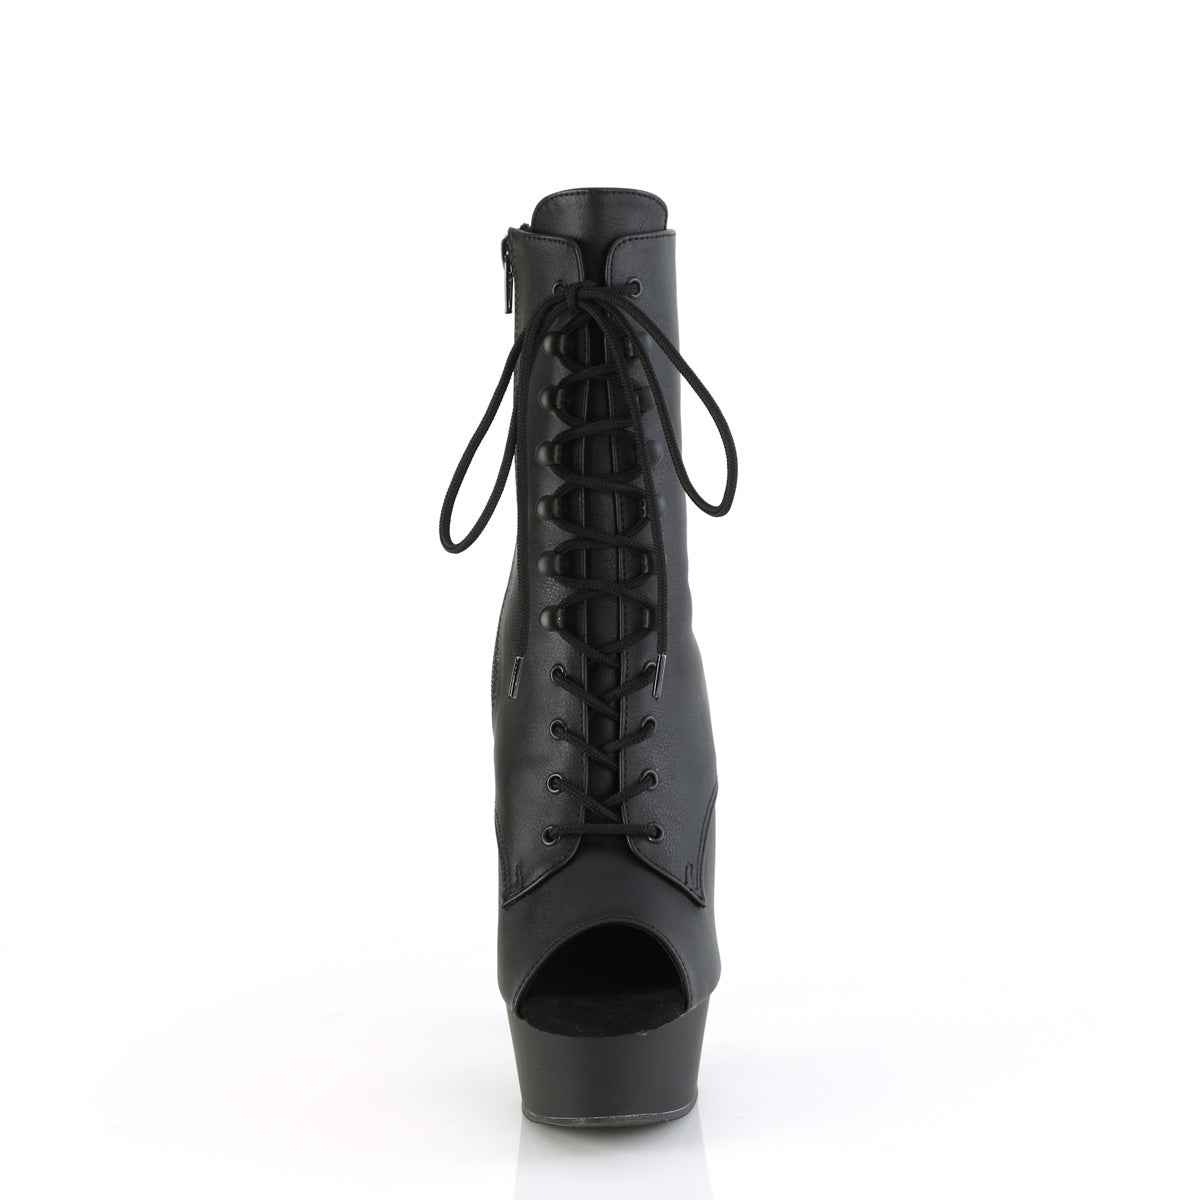 DELIGHT-1021 - Black Faux Leather Ankle Boots